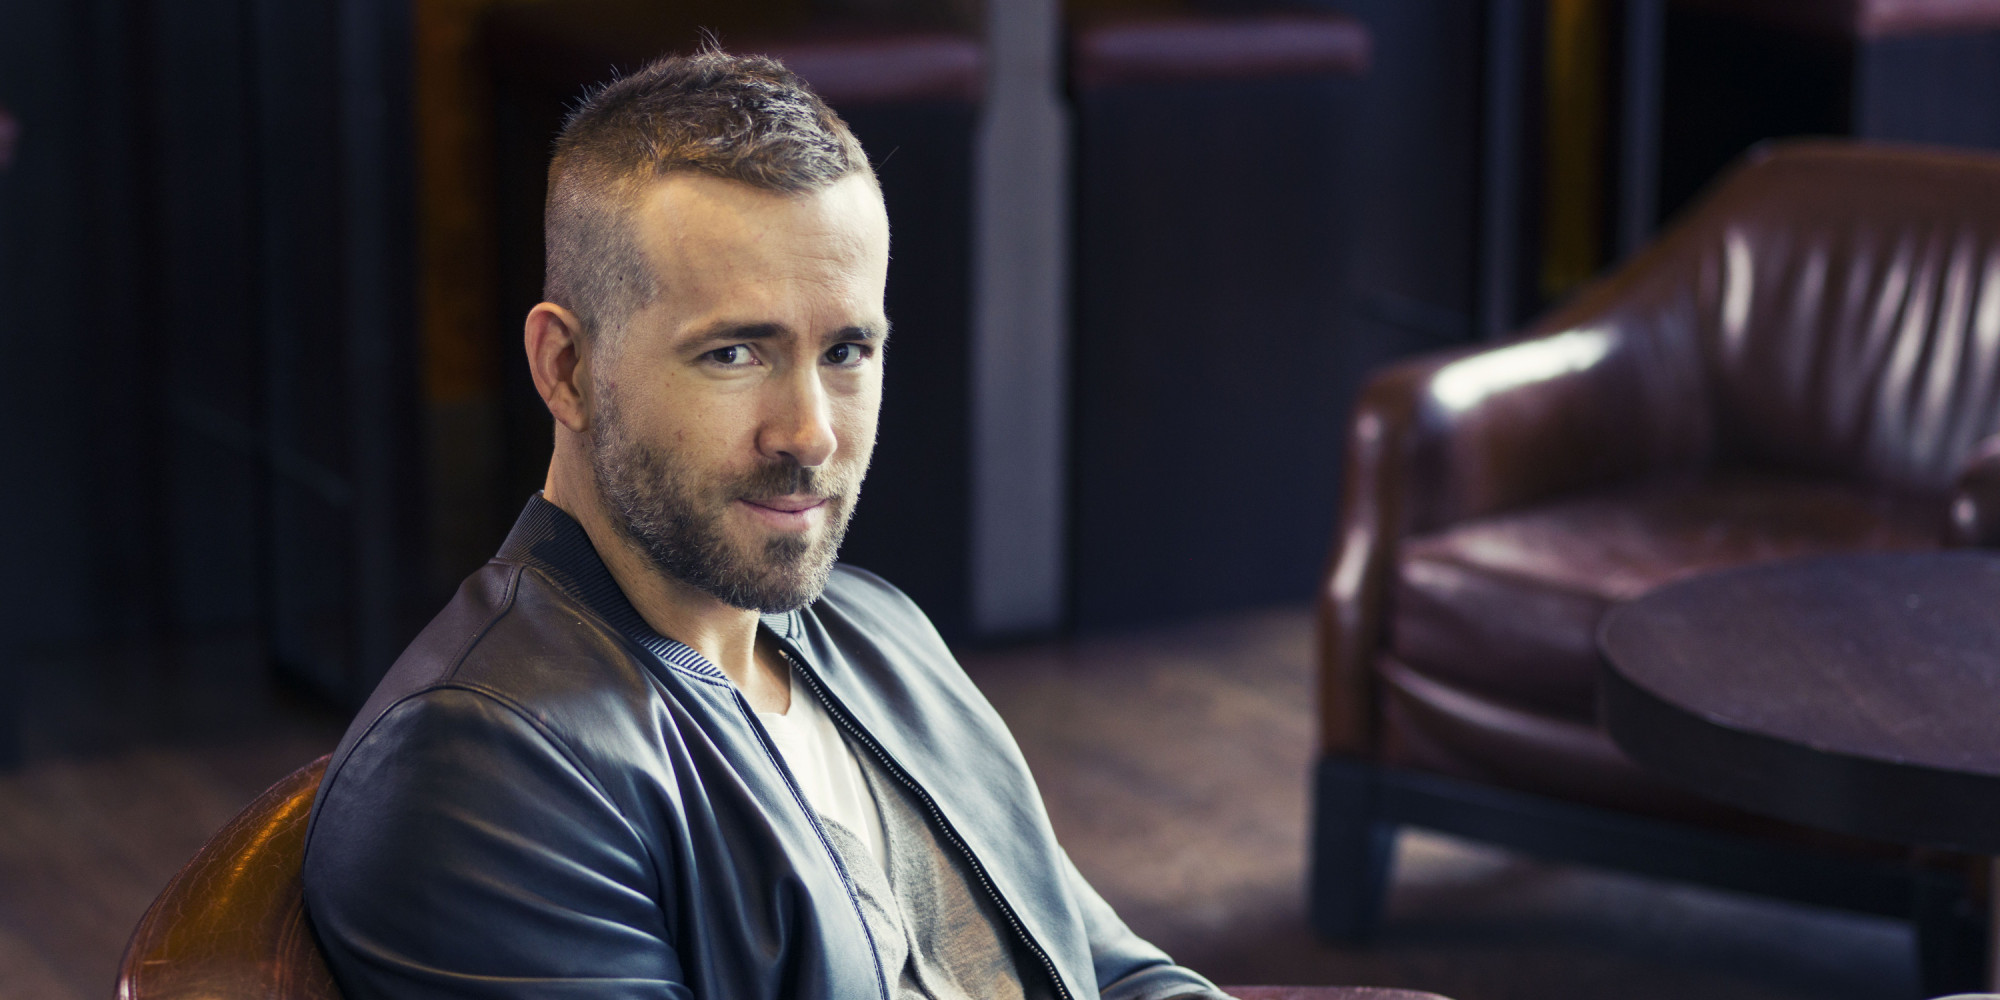 Canadian actor Ryan Reynolds poses for a portrait in promotion of his upcoming role in the film "Woman in Gold" on Thursday, Feb. 26, 2015 in New York. (Photo by Victoria Will/Invision/AP)